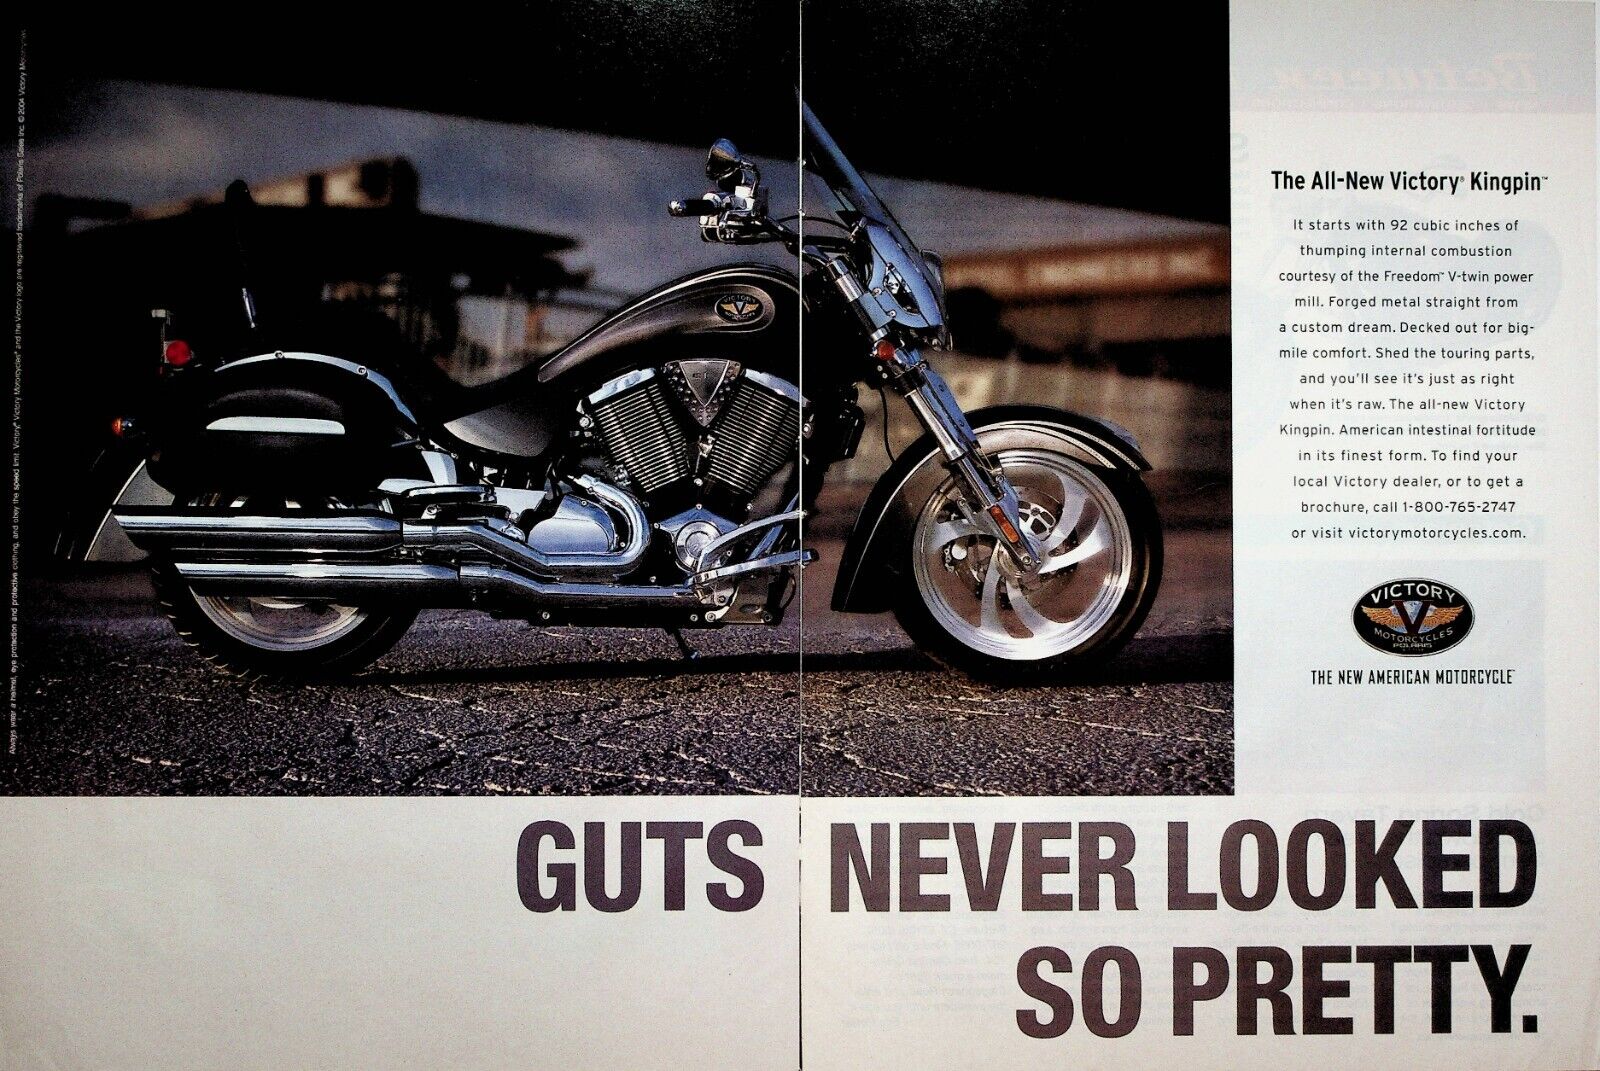 2004 Victory Kingpin - 2-Page Vintage Motorcycle Ad